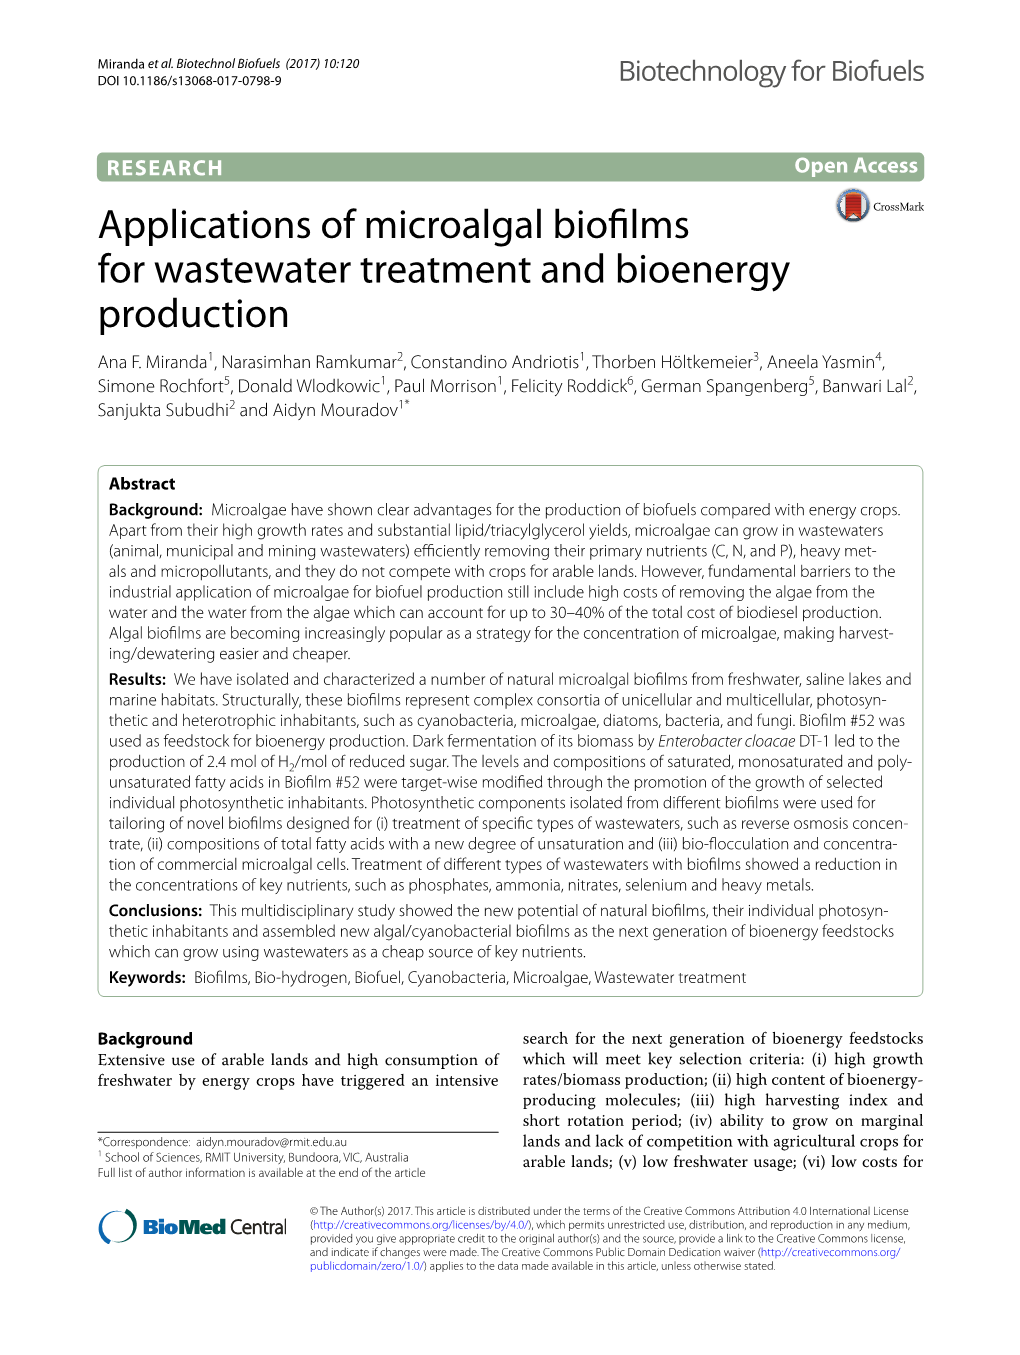 Applications of Microalgal Biofilms for Wastewater Treatment And